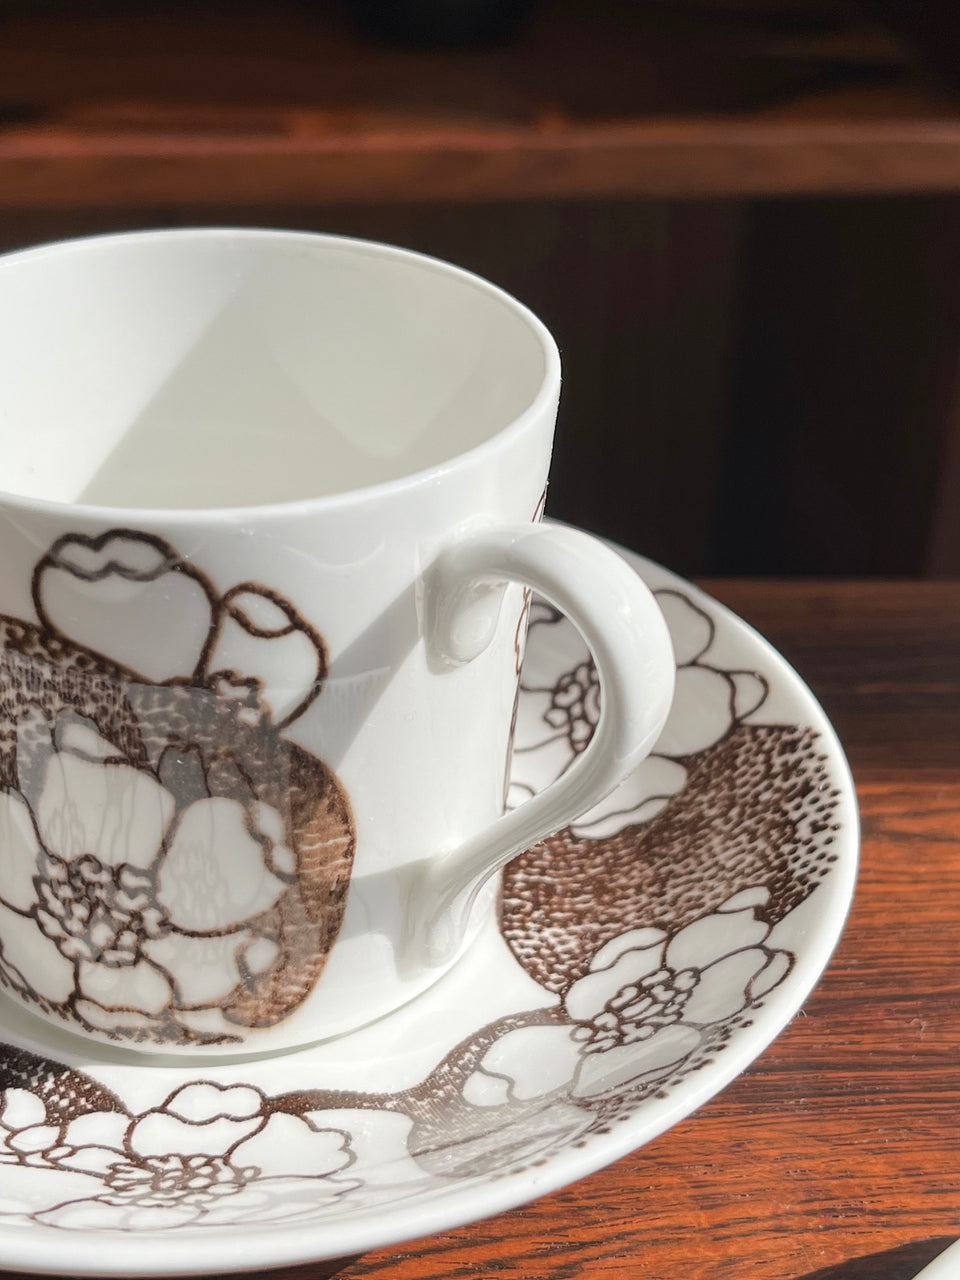 Gustavsberg EMMA Coffee Cup and Saucer Plate/グスタフスベリ コーヒーカップ&ソーサー プレート スウェーデン 北欧ヴィンテージ食器